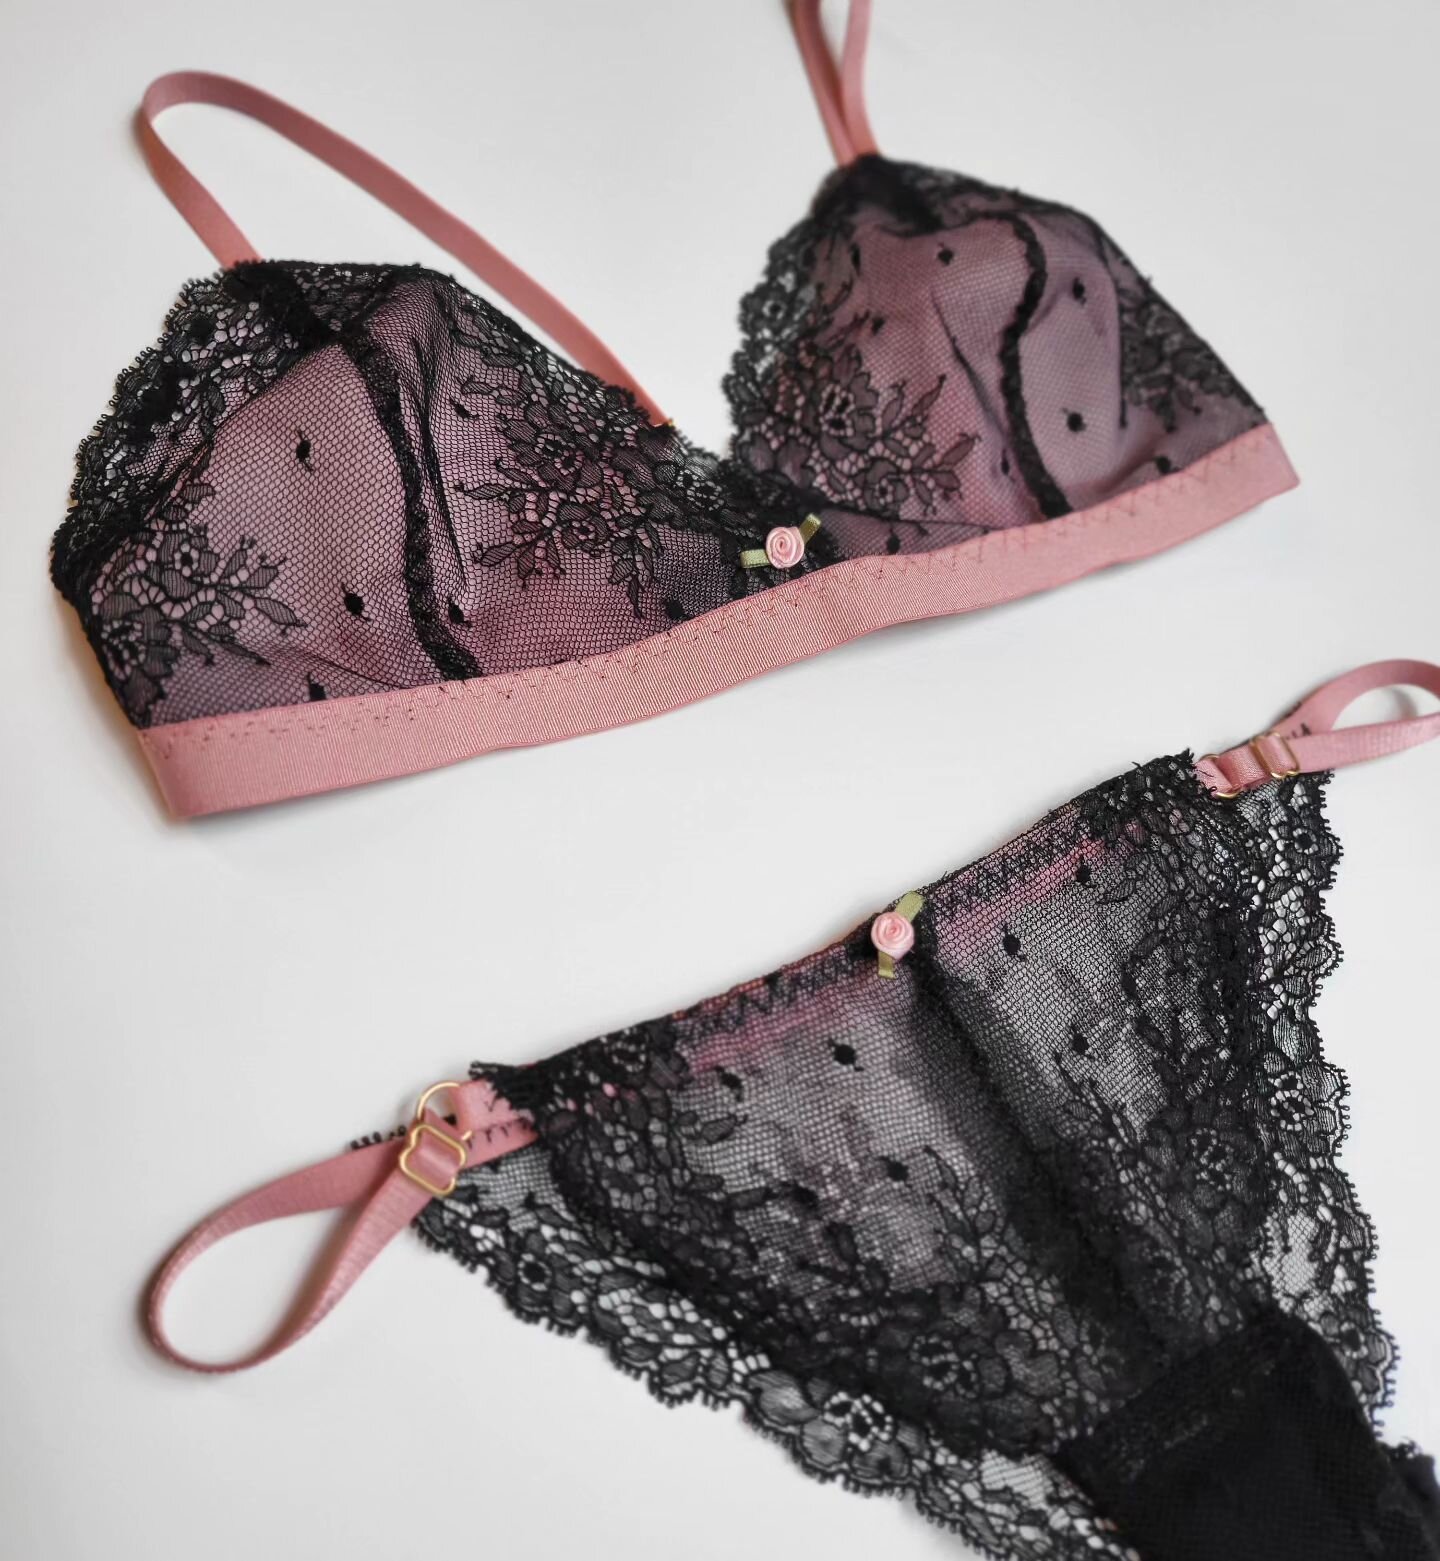 Westside - Add oomph to your lingerie collection with these